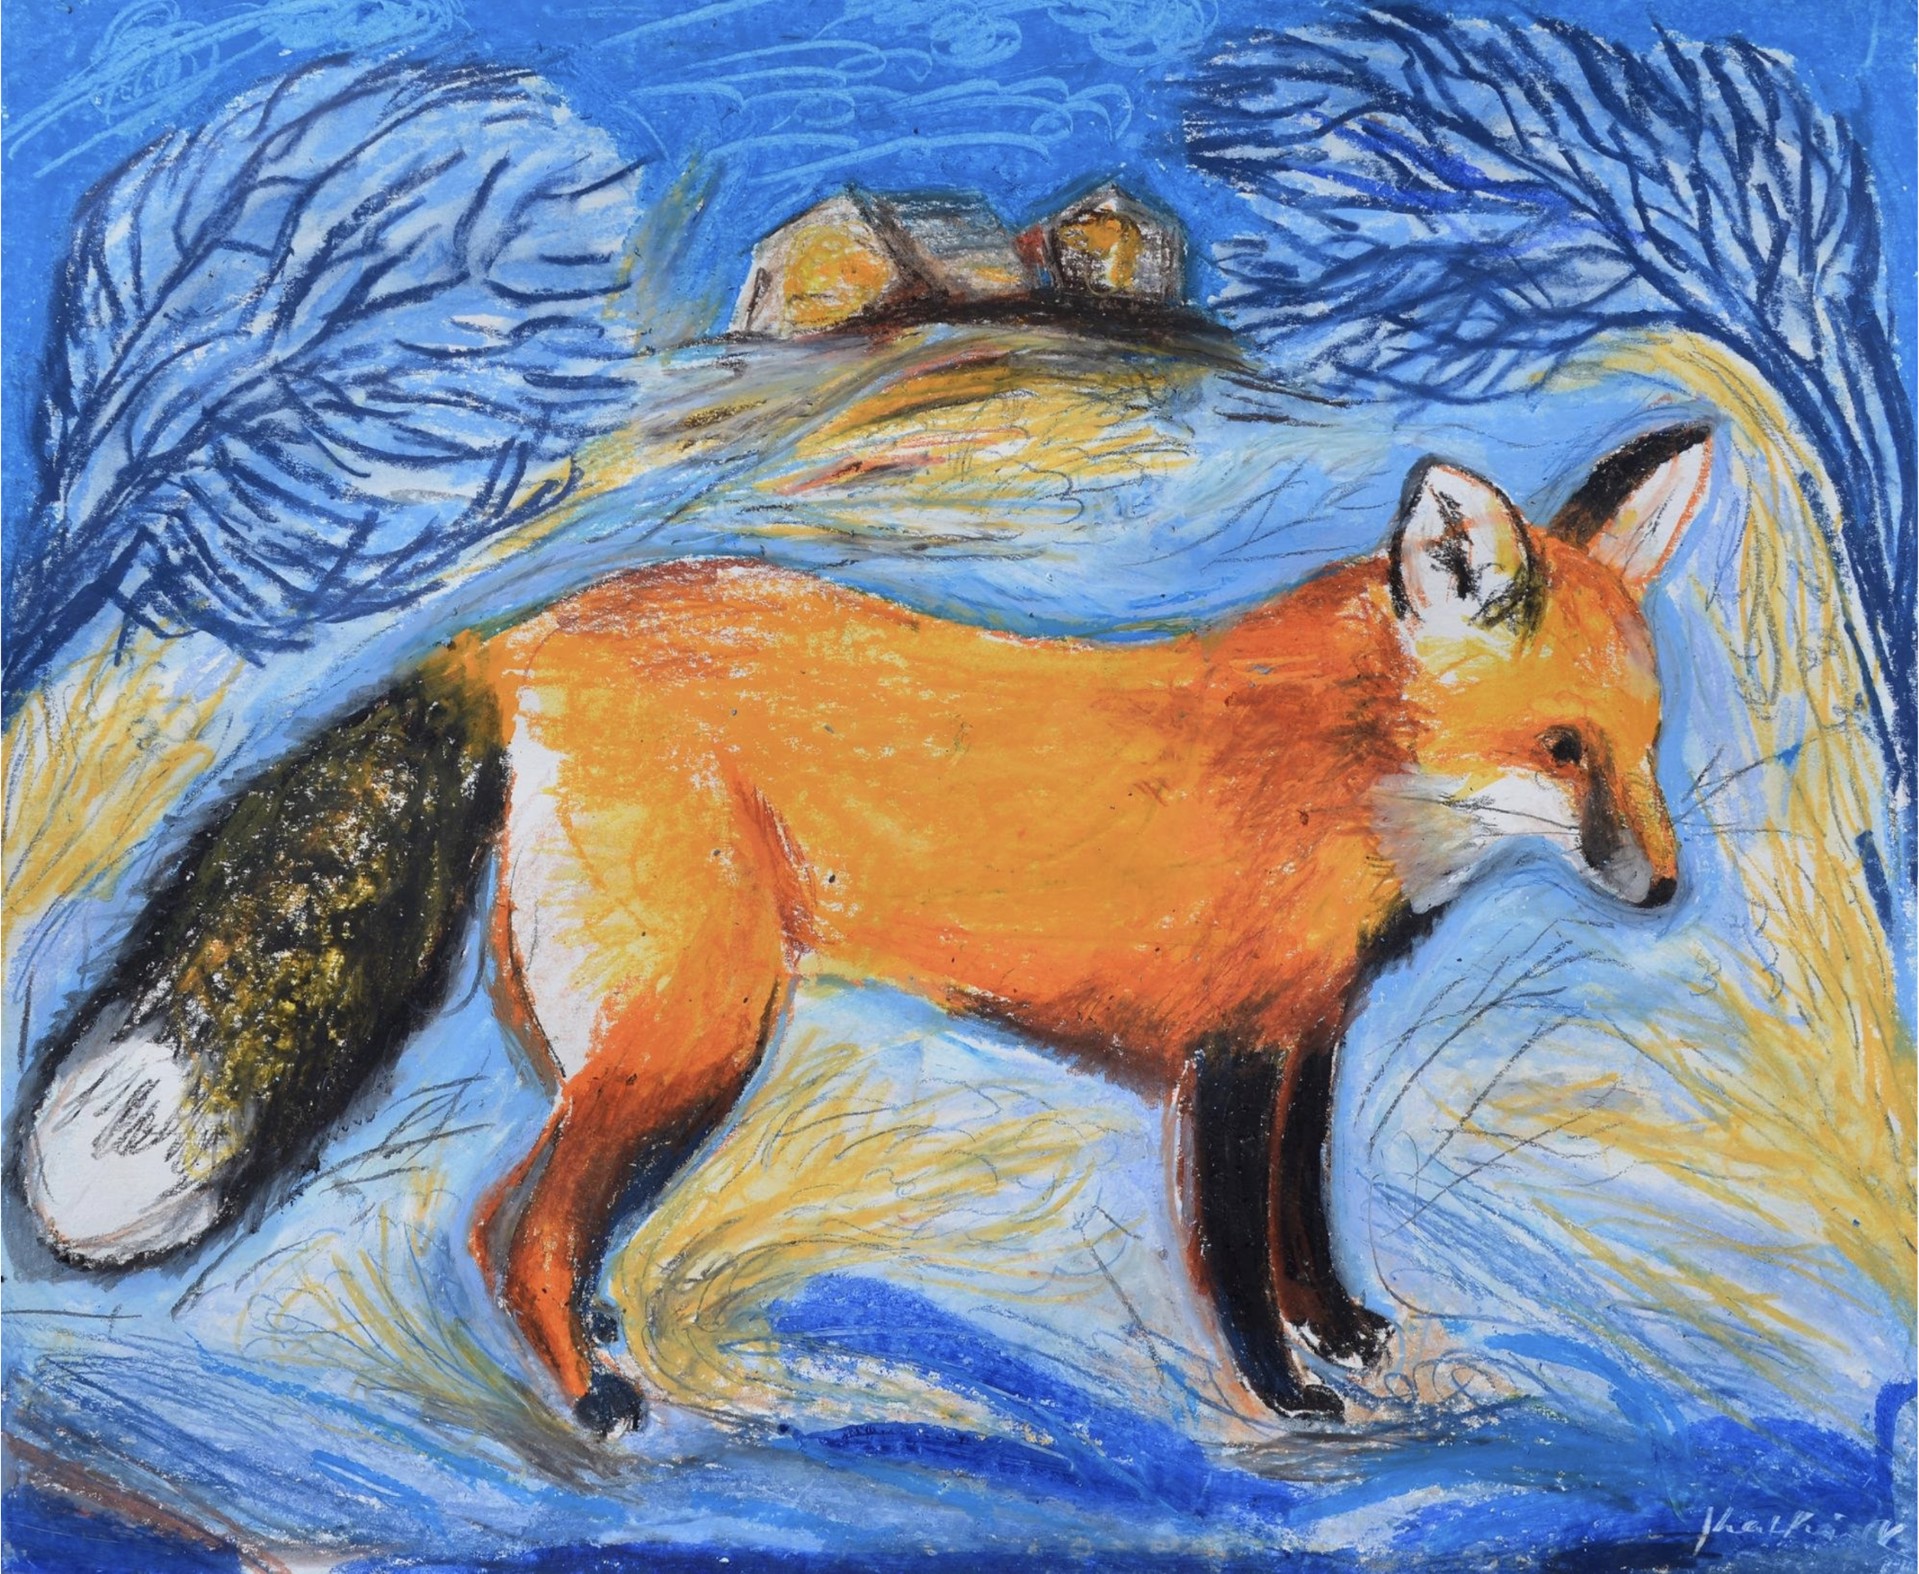 Red Fox Surrounded by Snow & Golden Grass by Kat Kinnick